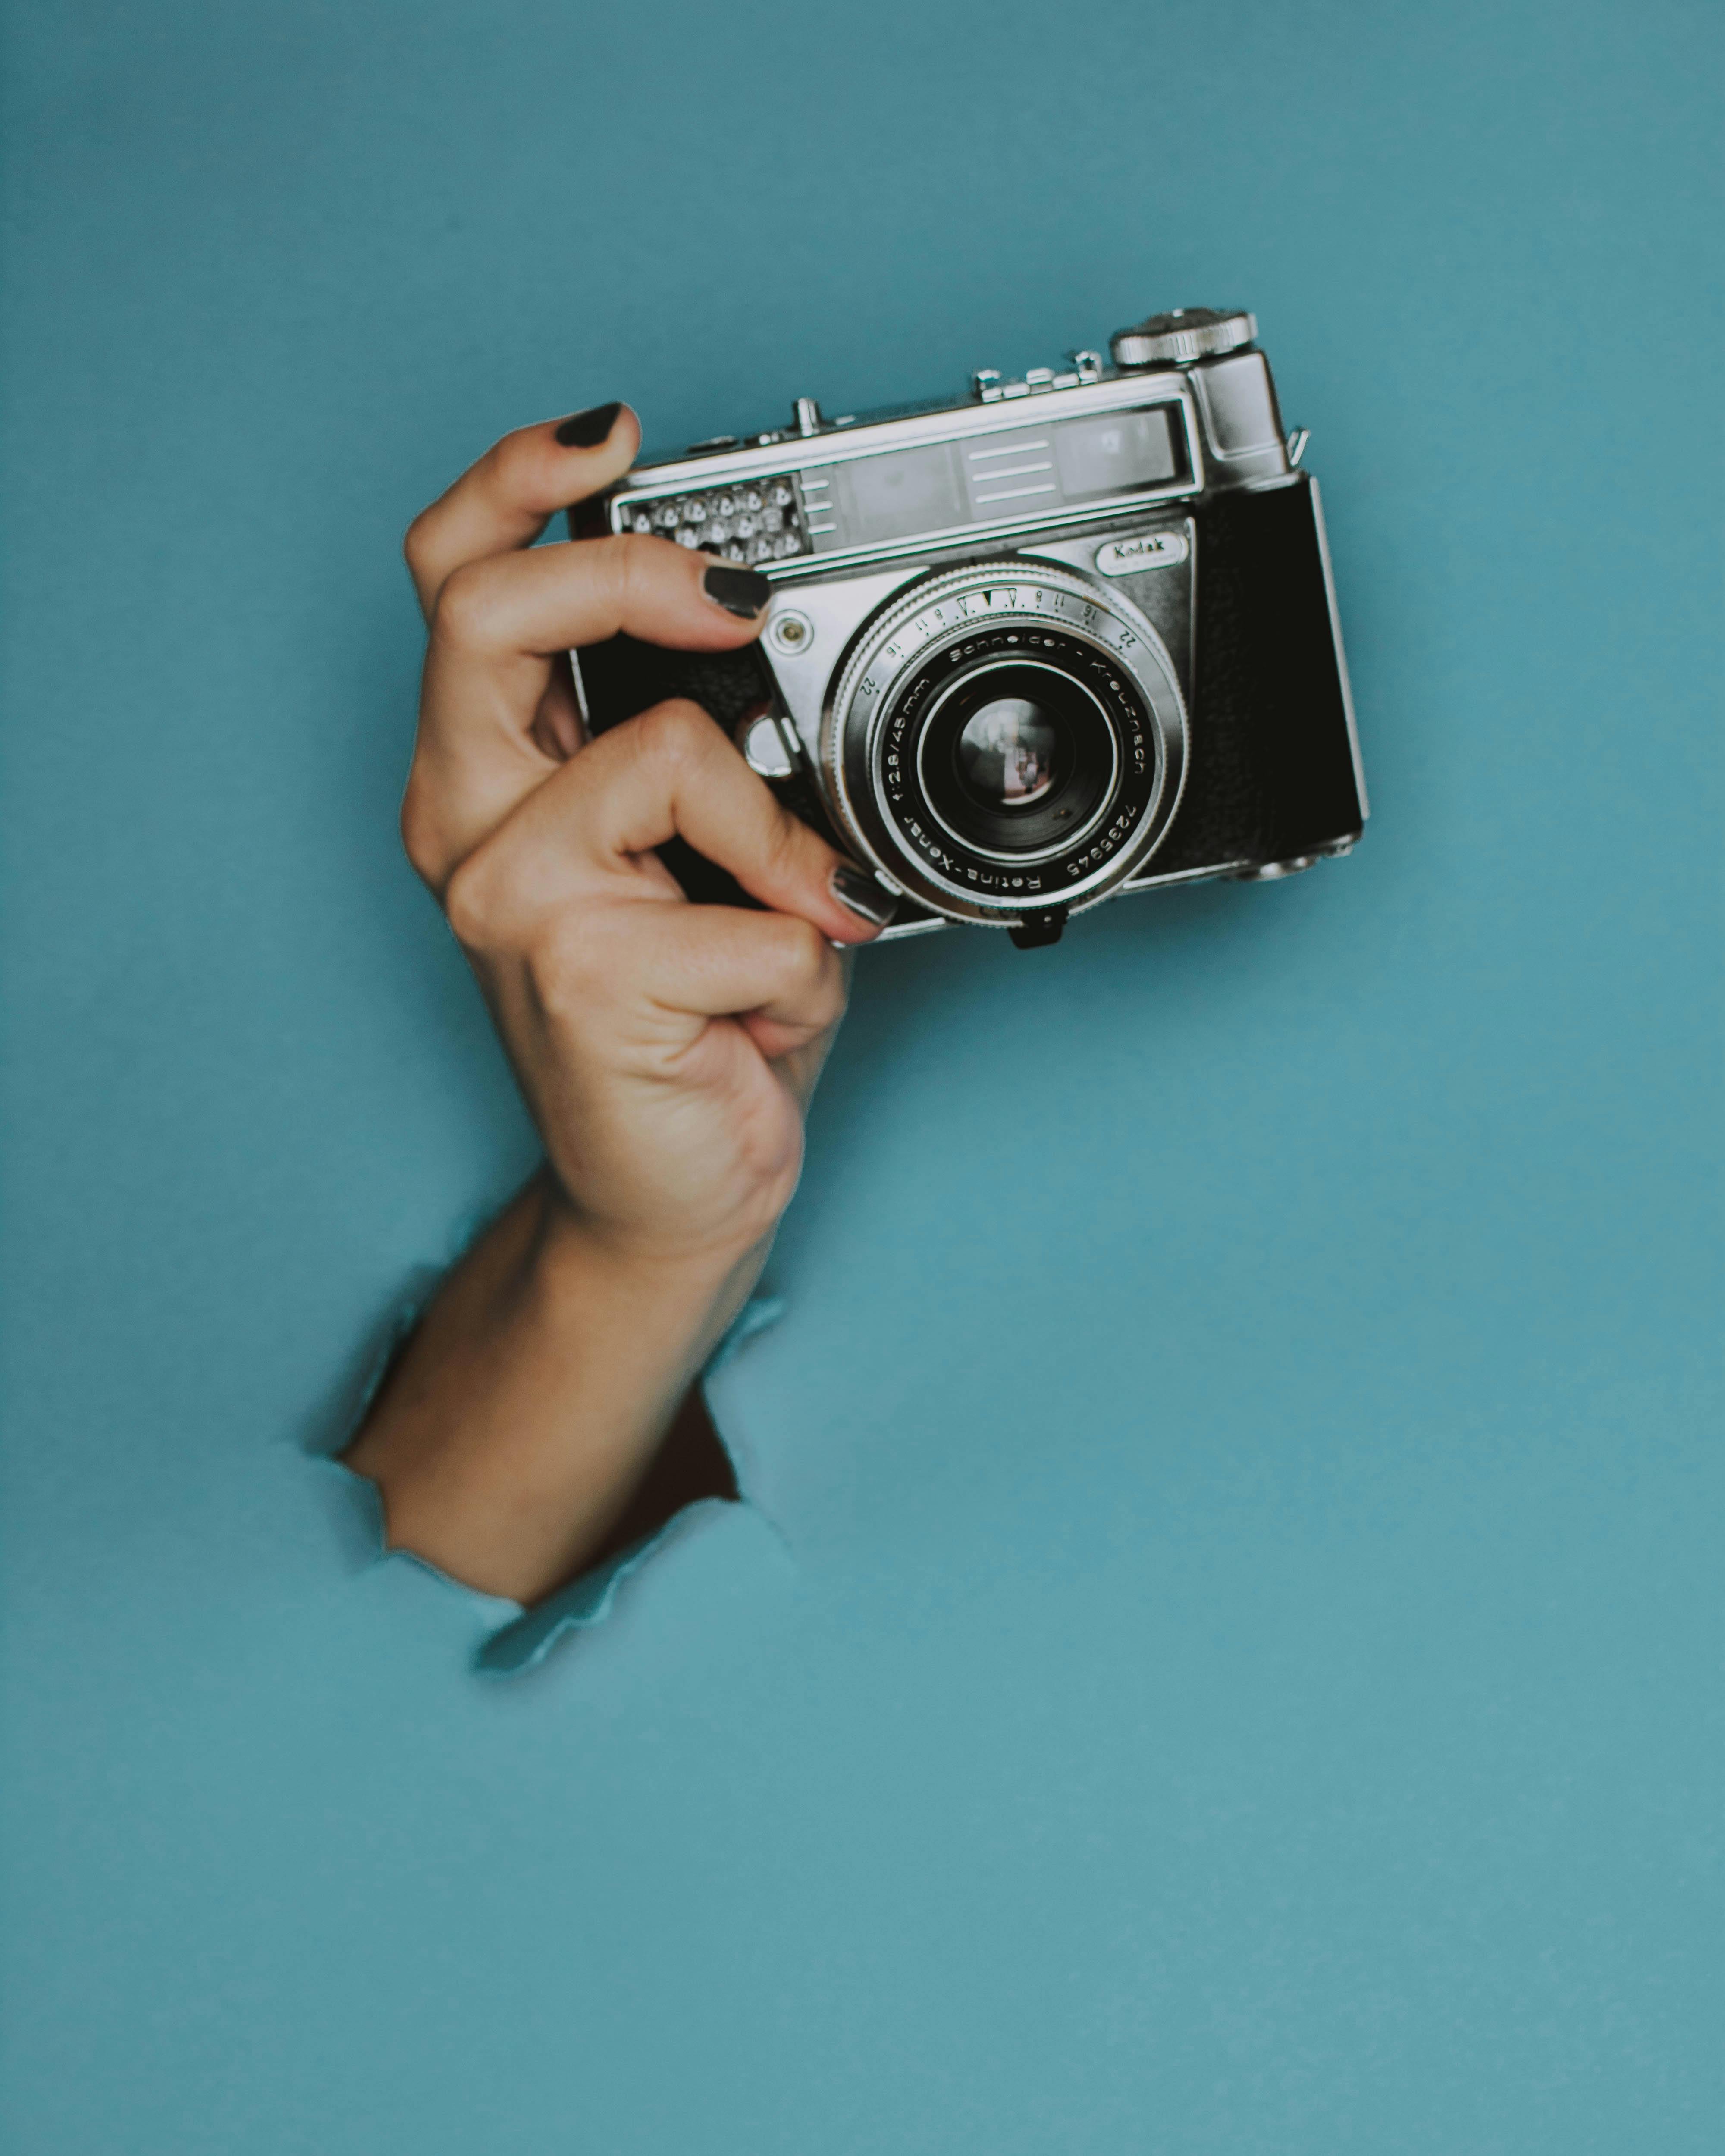 vintage photography camera pictures